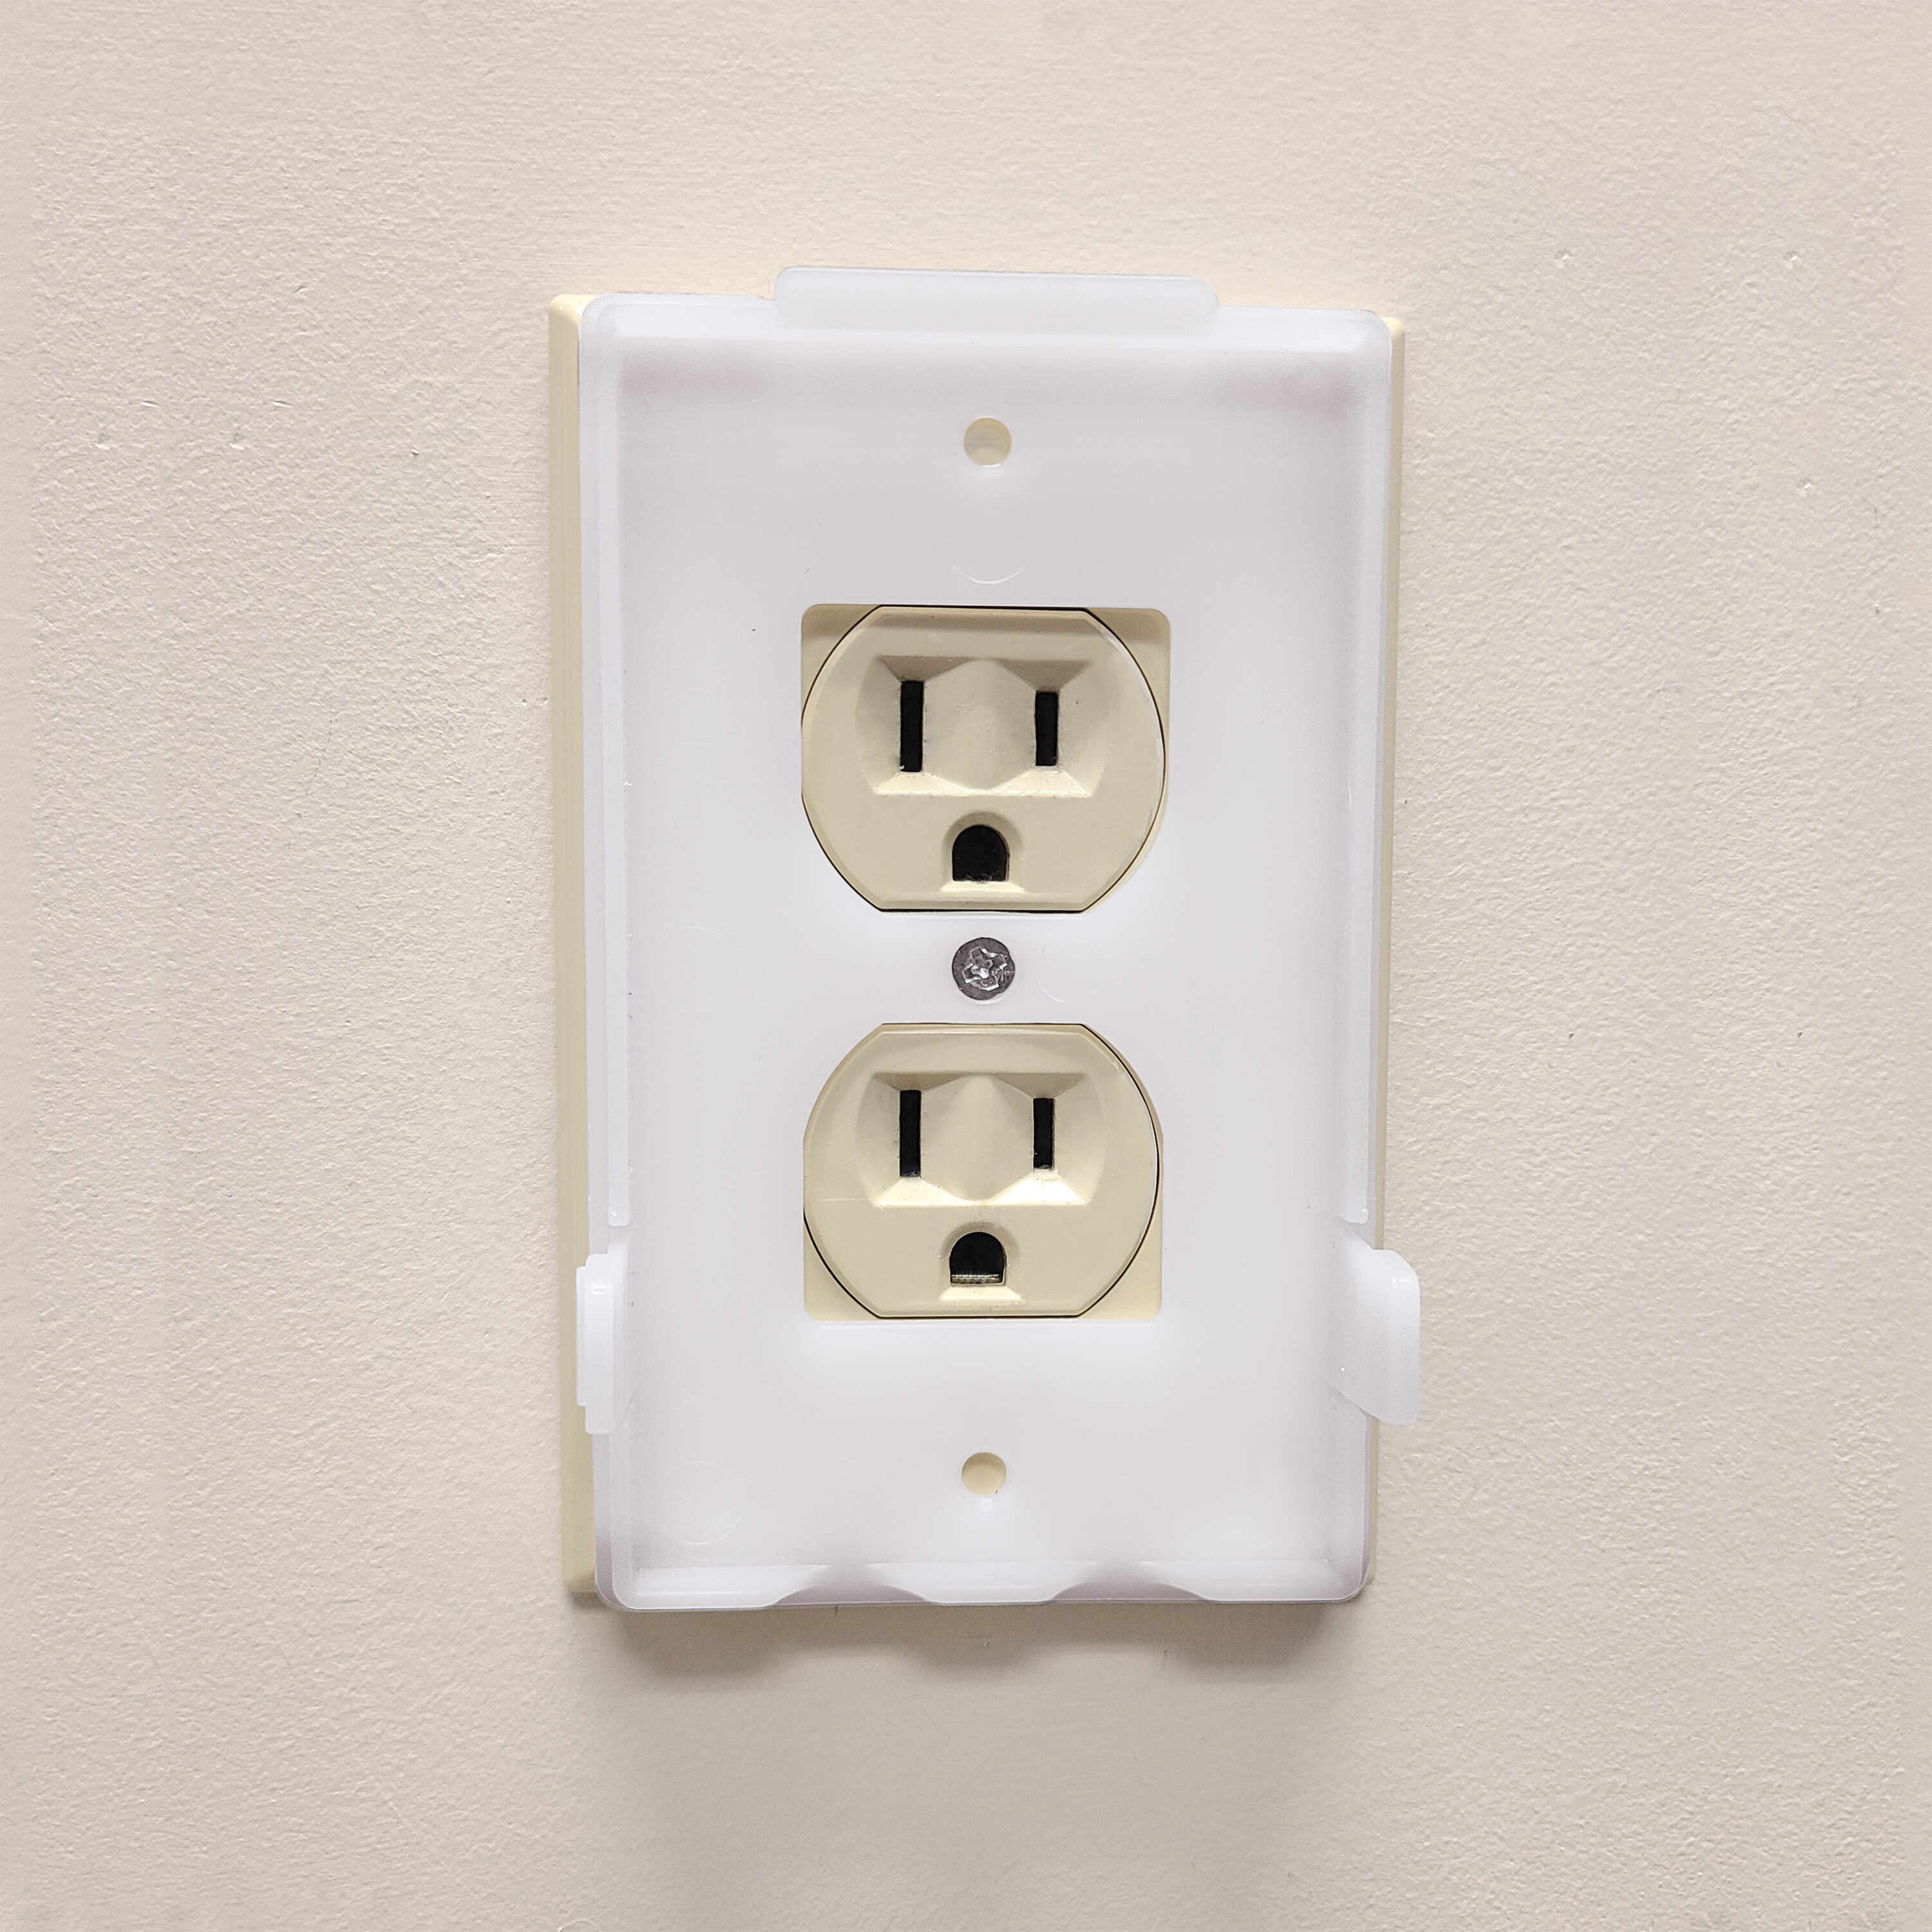 2165 SWITCH & OUTLET COVER ( Buy 6 OR MORE DISCOUNTED AT CHECKOUT) –